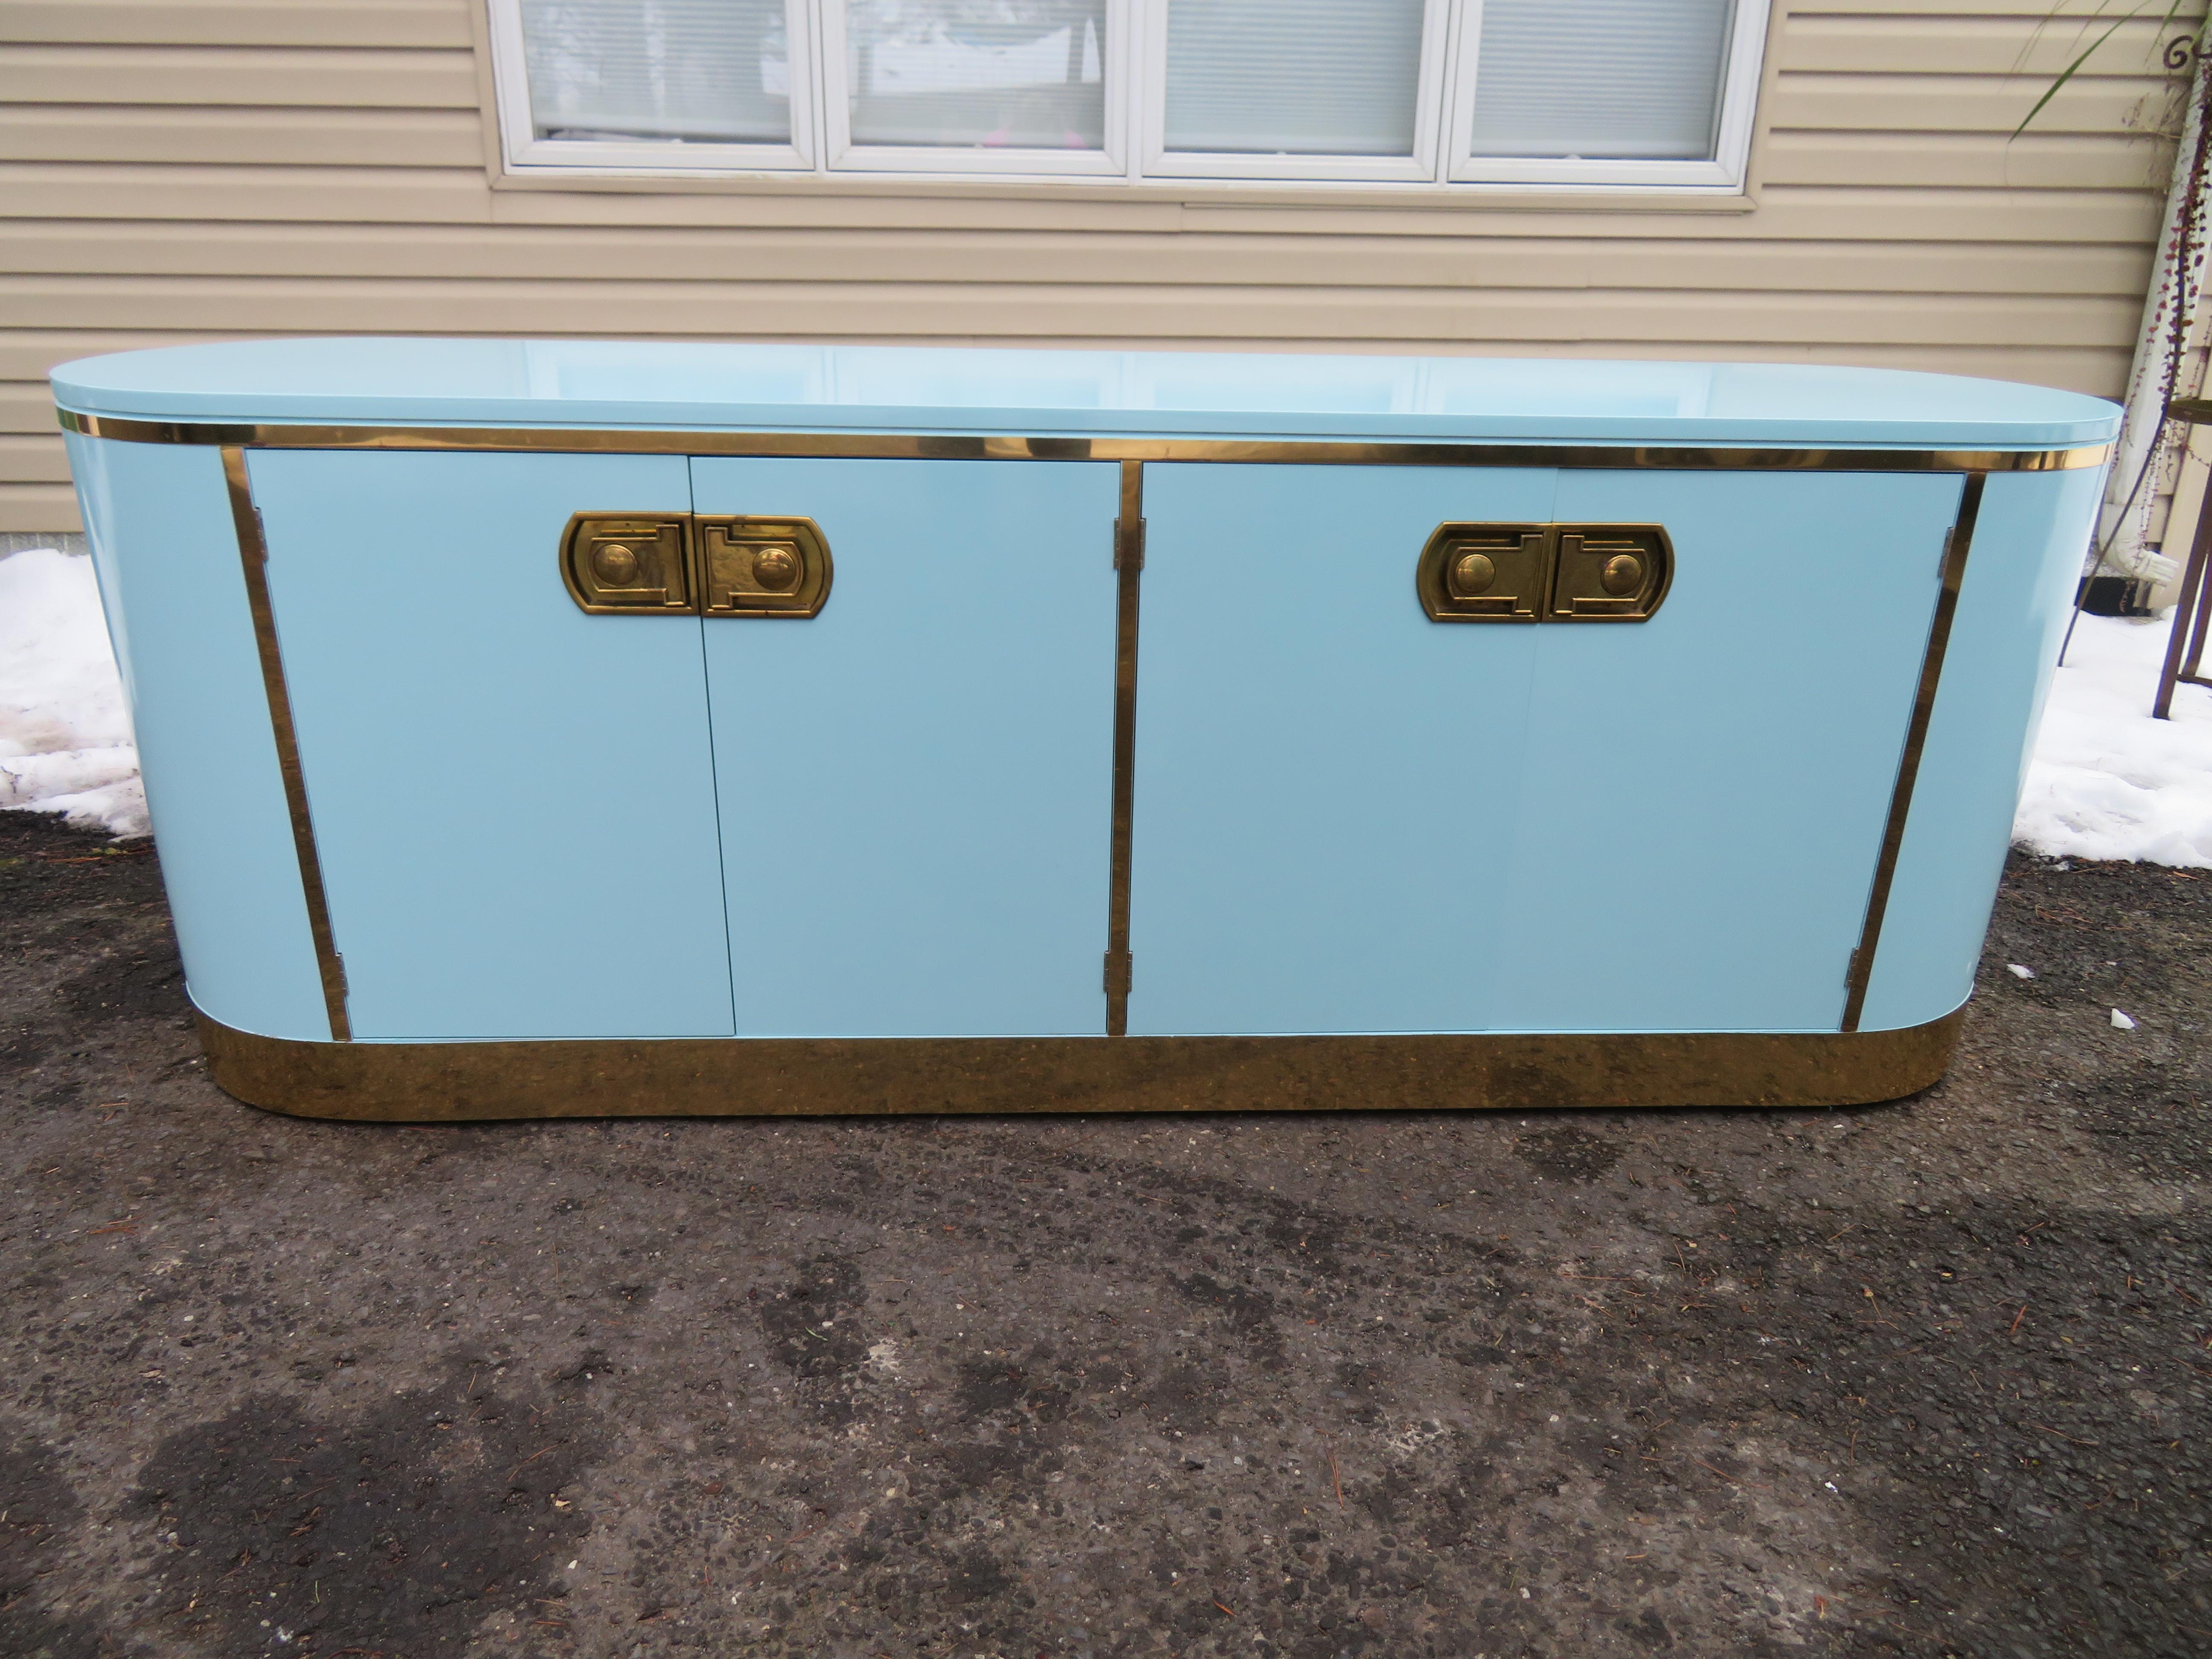 Marvelous Mastercraft Tiffany blue pill shaped credenza. This piece is to die for fabulous with the newly lacquered finish in a soft tiffany blue. Done inside and out it just looks great from top to bottom. This is one of those pieces you just have